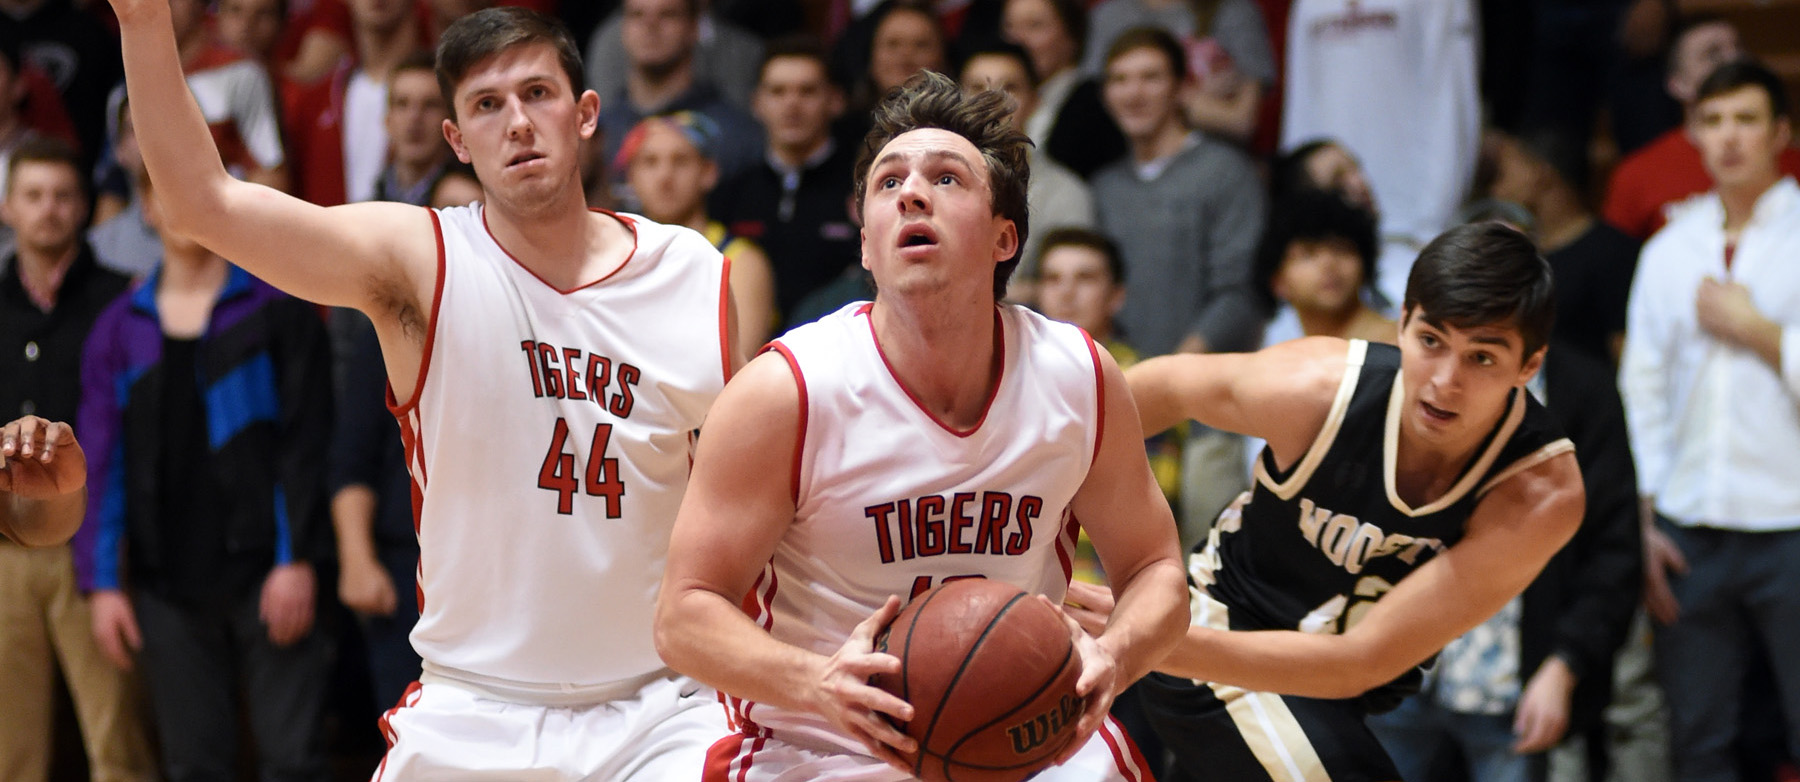 For the second straight game, Phillippi came up big for Wittenberg in crunch time. File Photo|Nick Falzerano